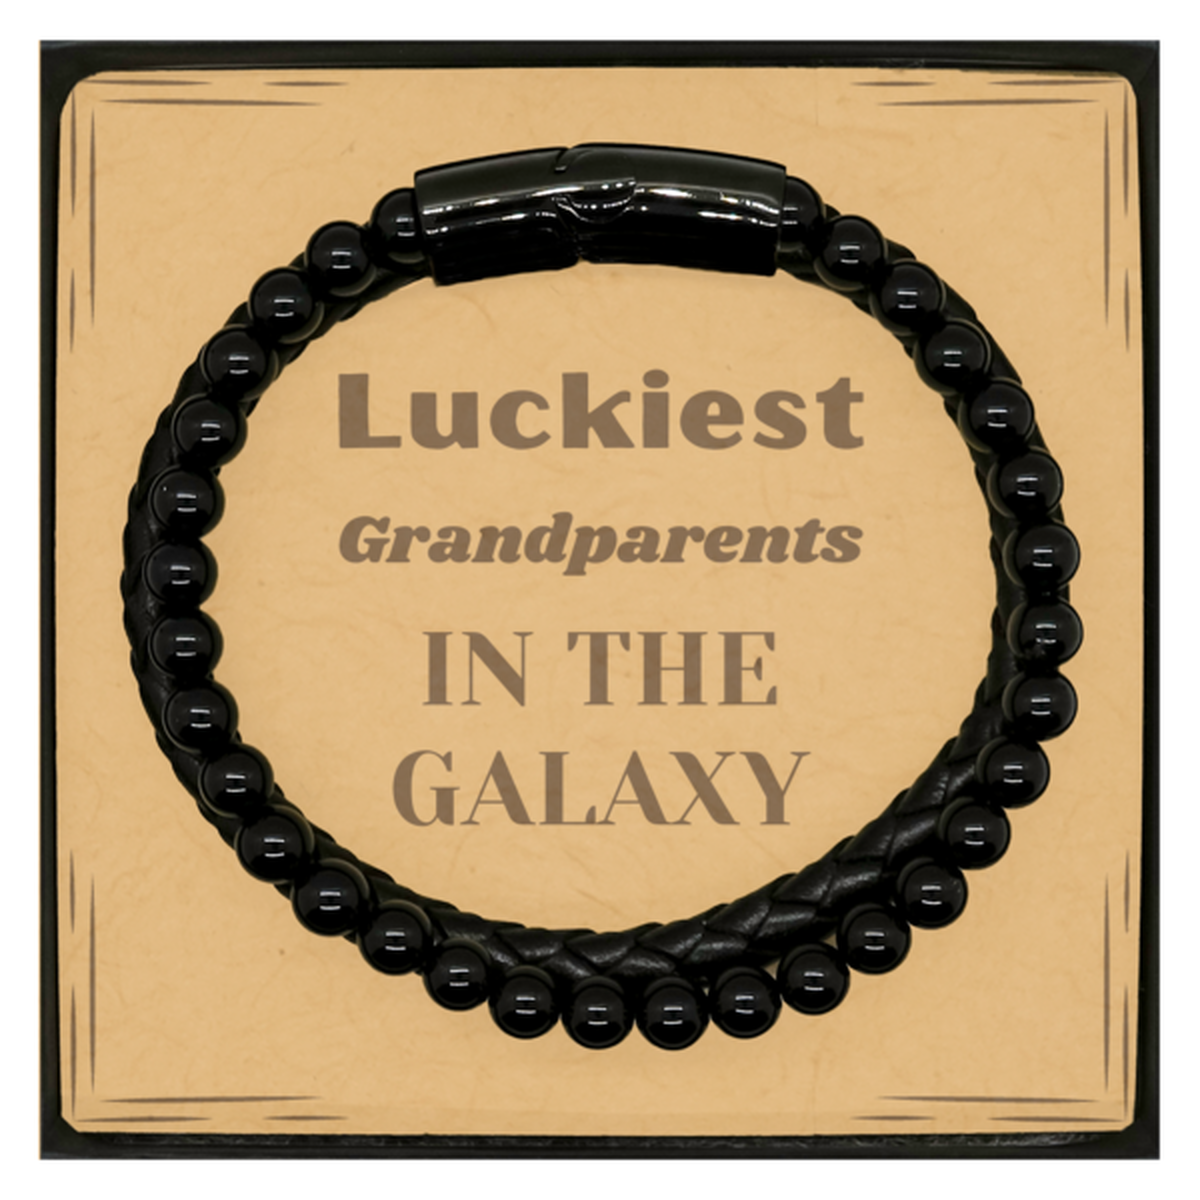 Luckiest Grandparents in the Galaxy, To My Grandparents Message Card Gifts, Christmas Grandparents Stone Leather Bracelets Gifts, X-mas Birthday Unique Gifts For Grandparents Men Women